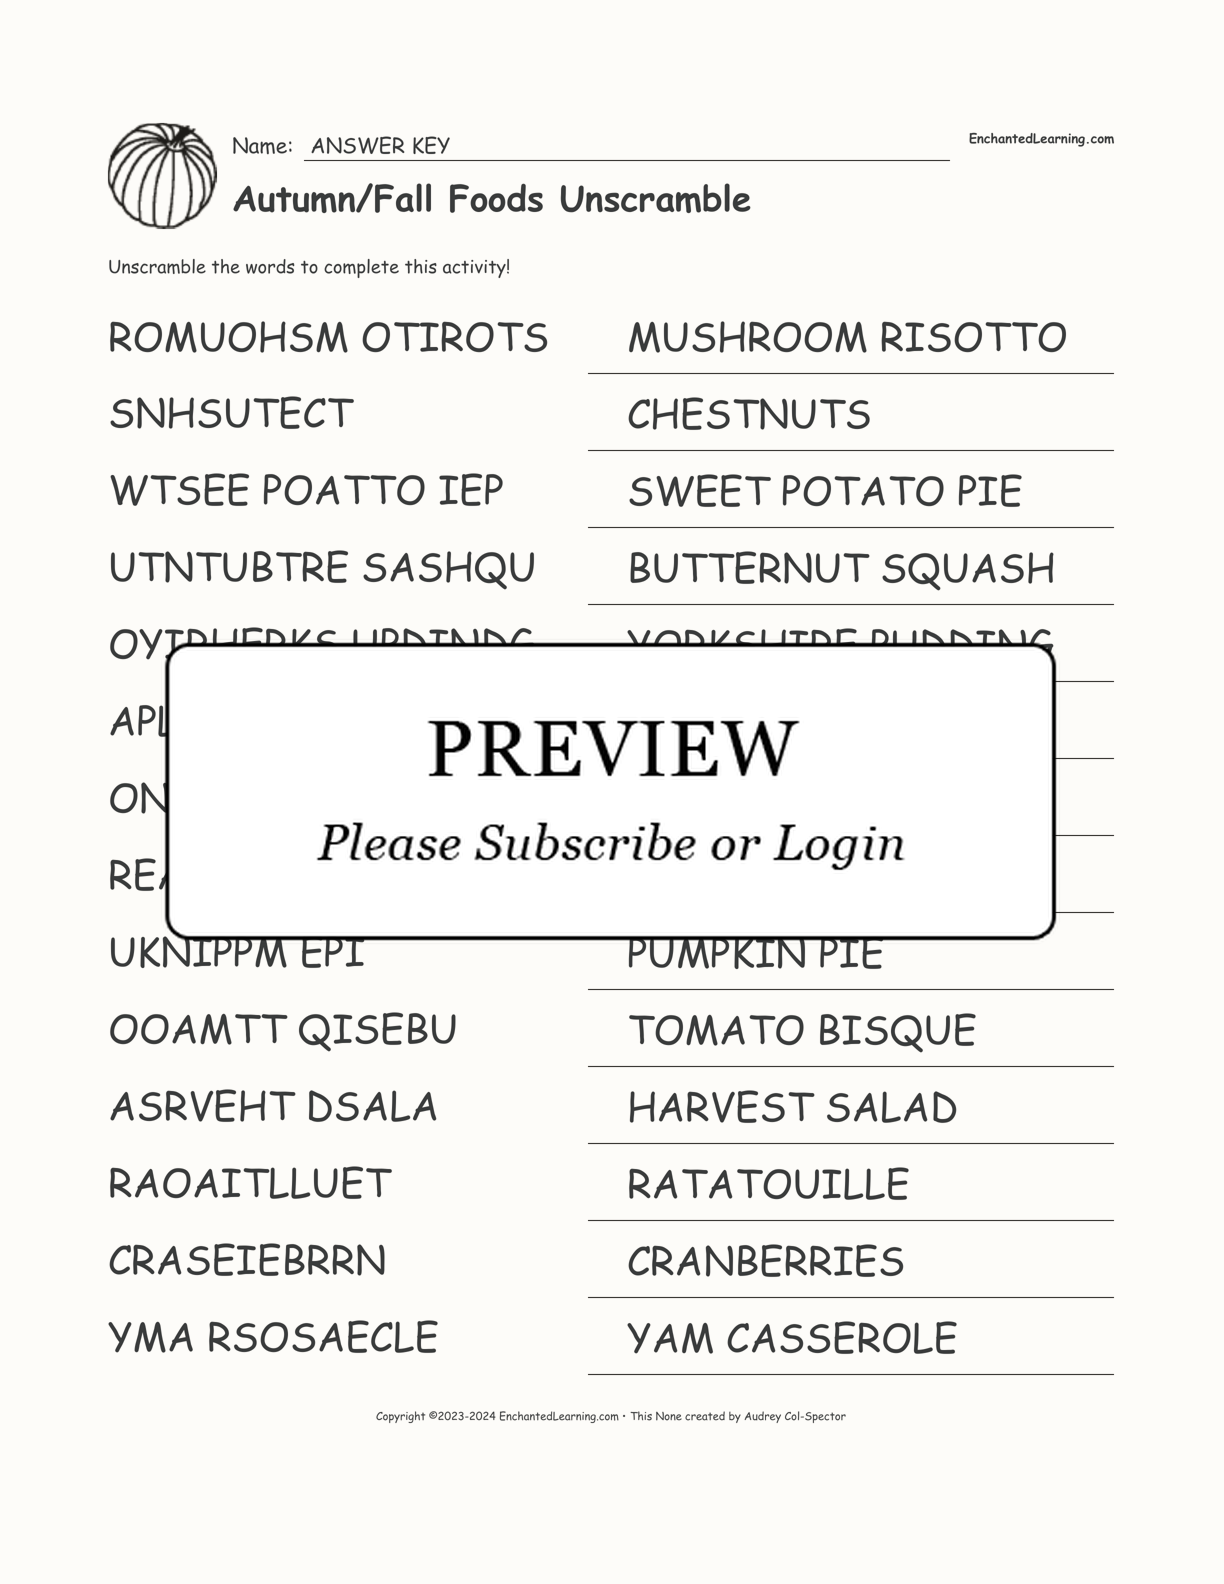 Autumn/Fall Foods Unscramble interactive worksheet page 2